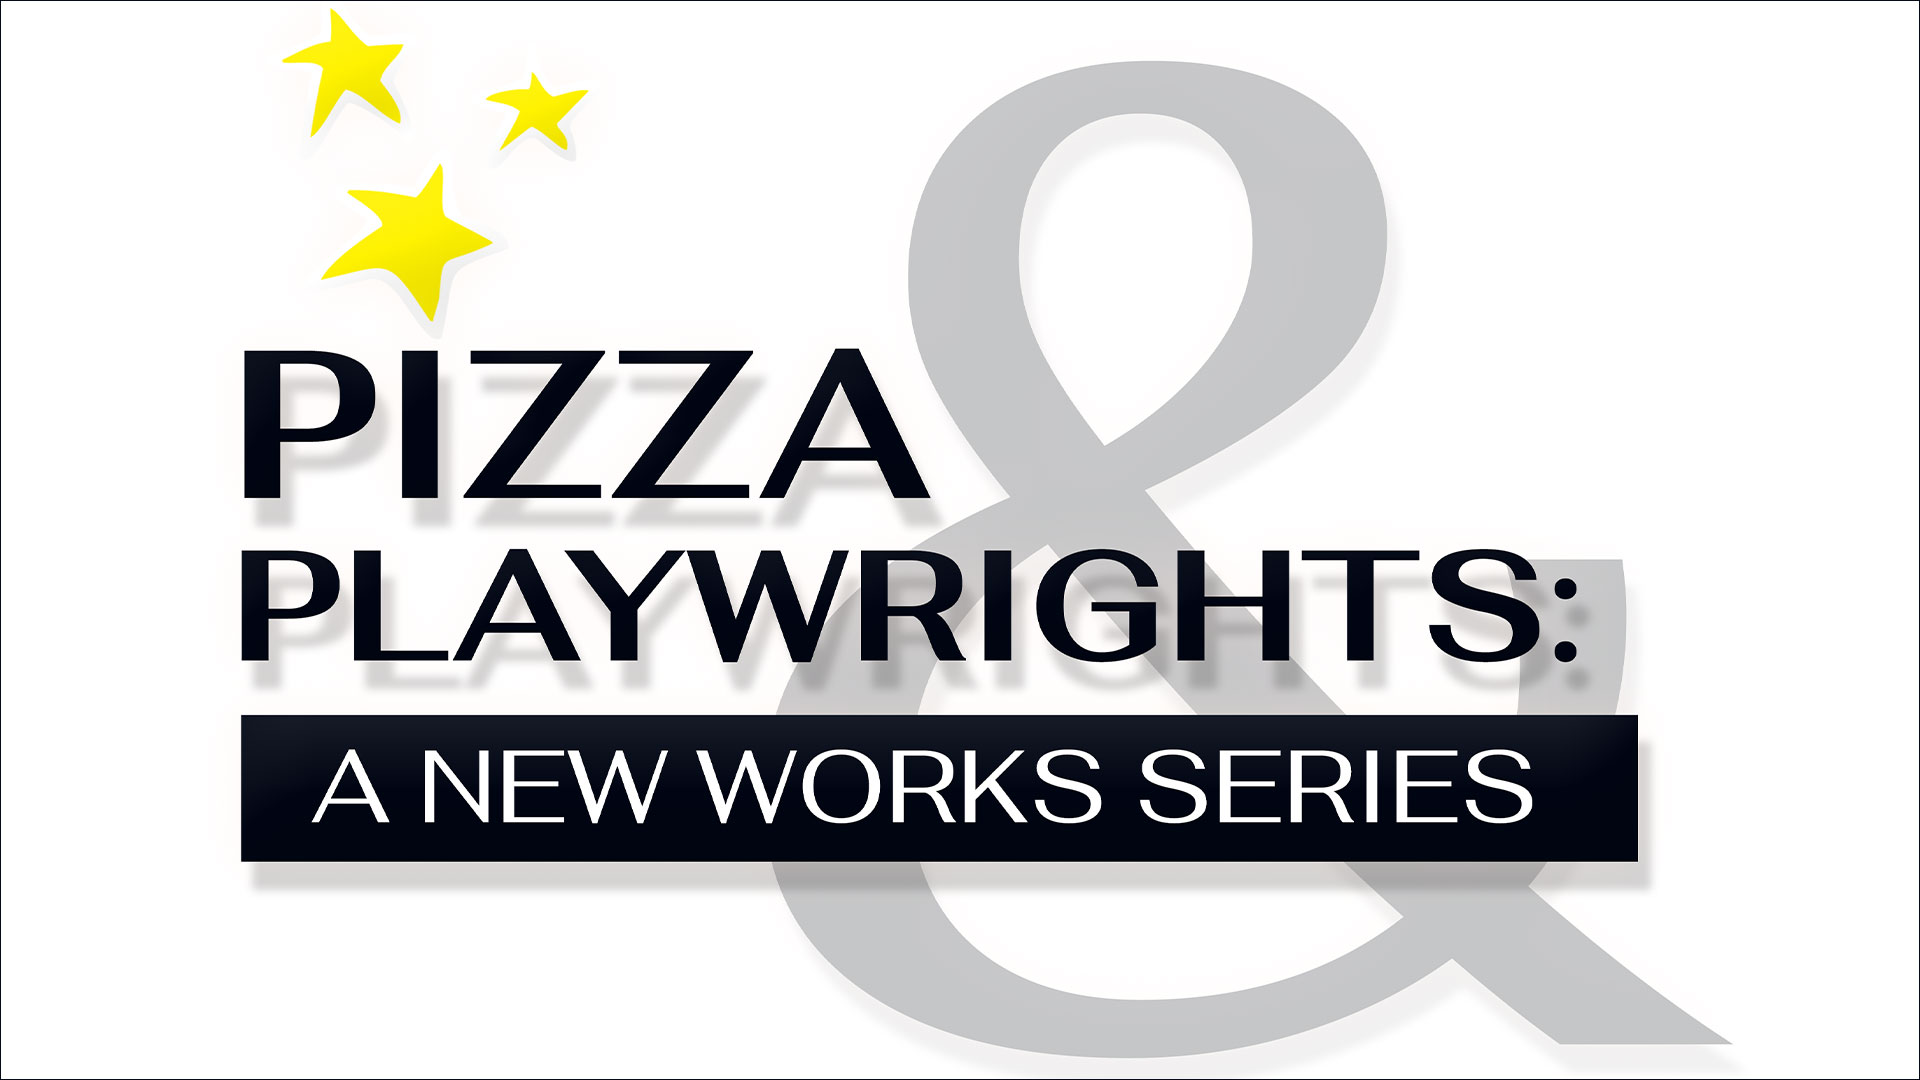 Pizza & Playwrights: A New Works Series